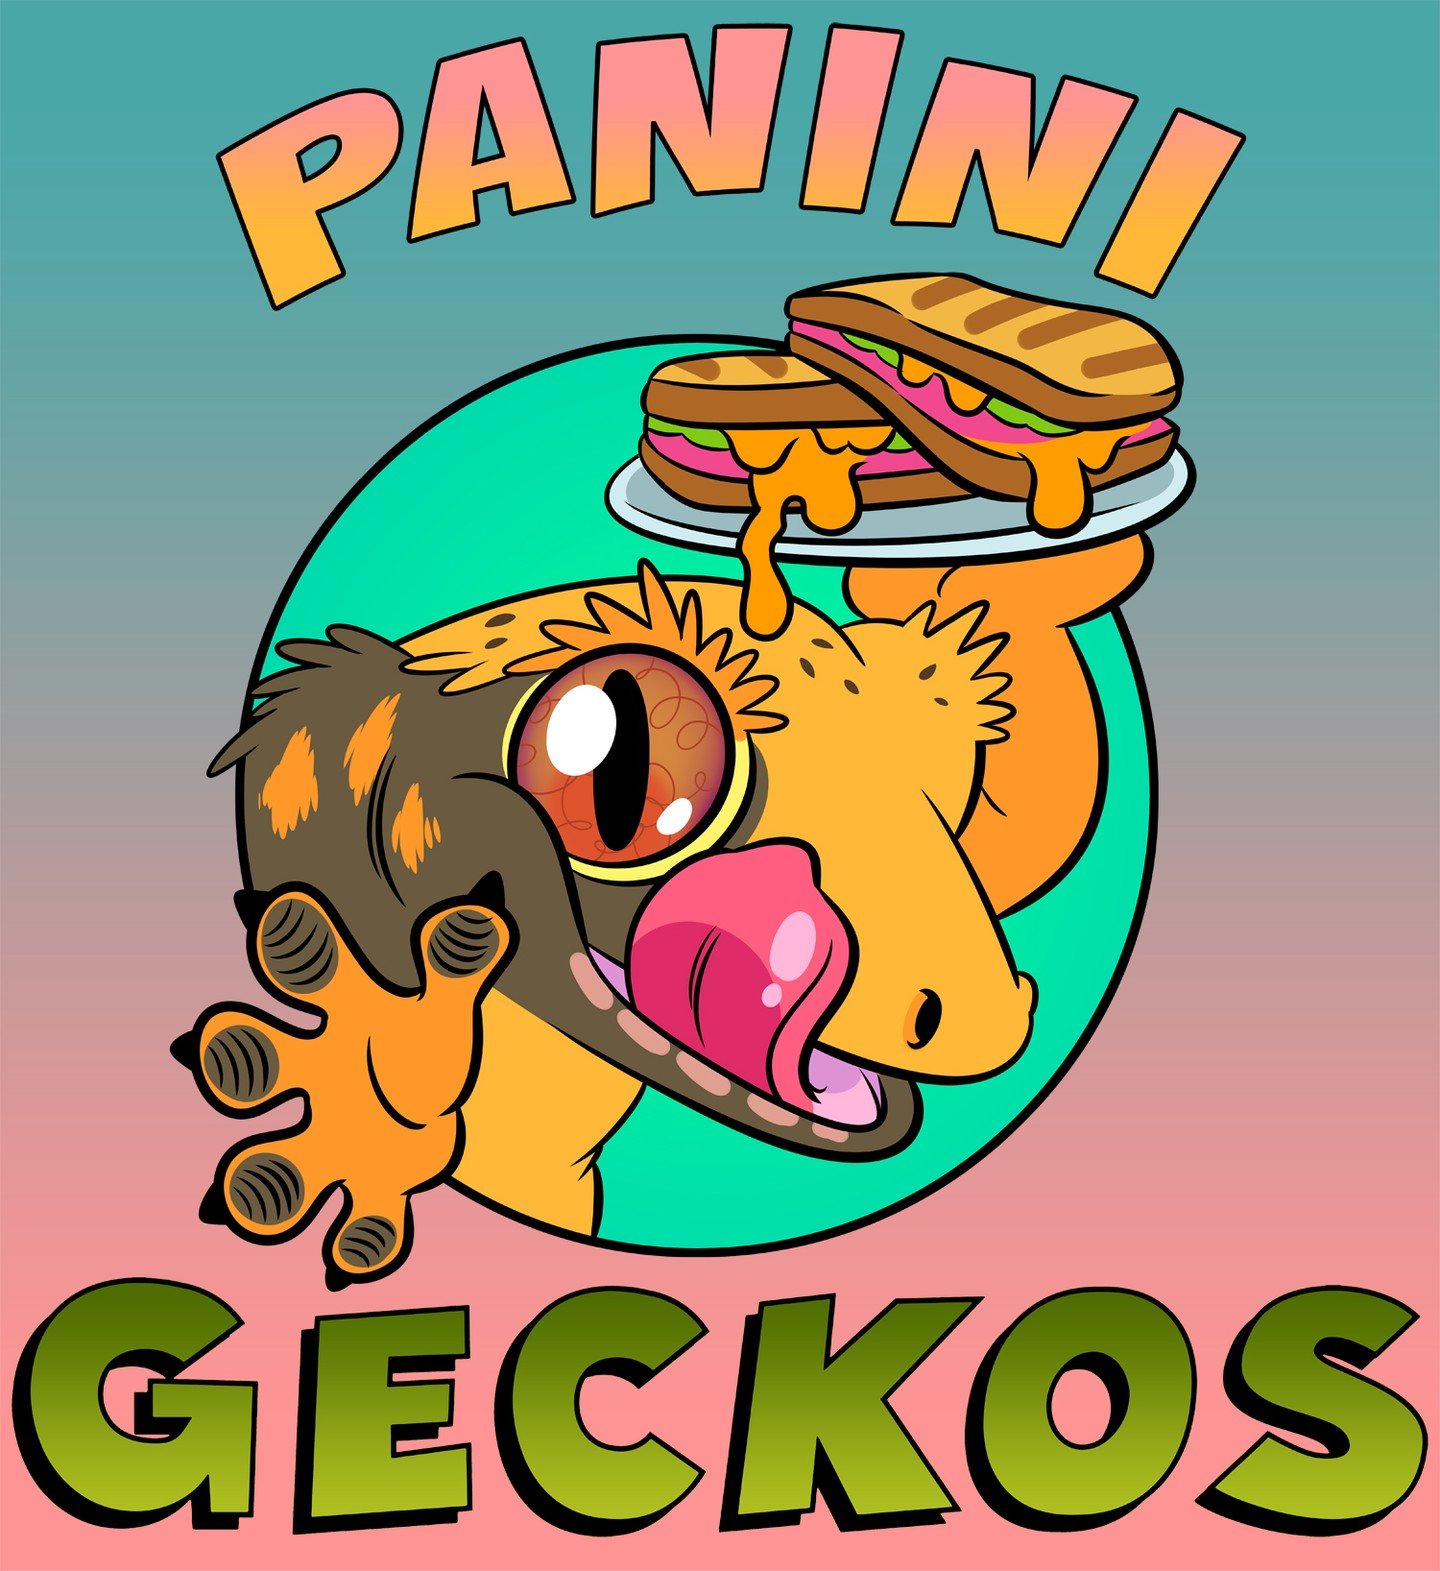 Recent commission for a crested gecko breeder (no they do not eat them)

.
.
.

#digitalart #commission #logo #logodesign #art #illustration #geckos